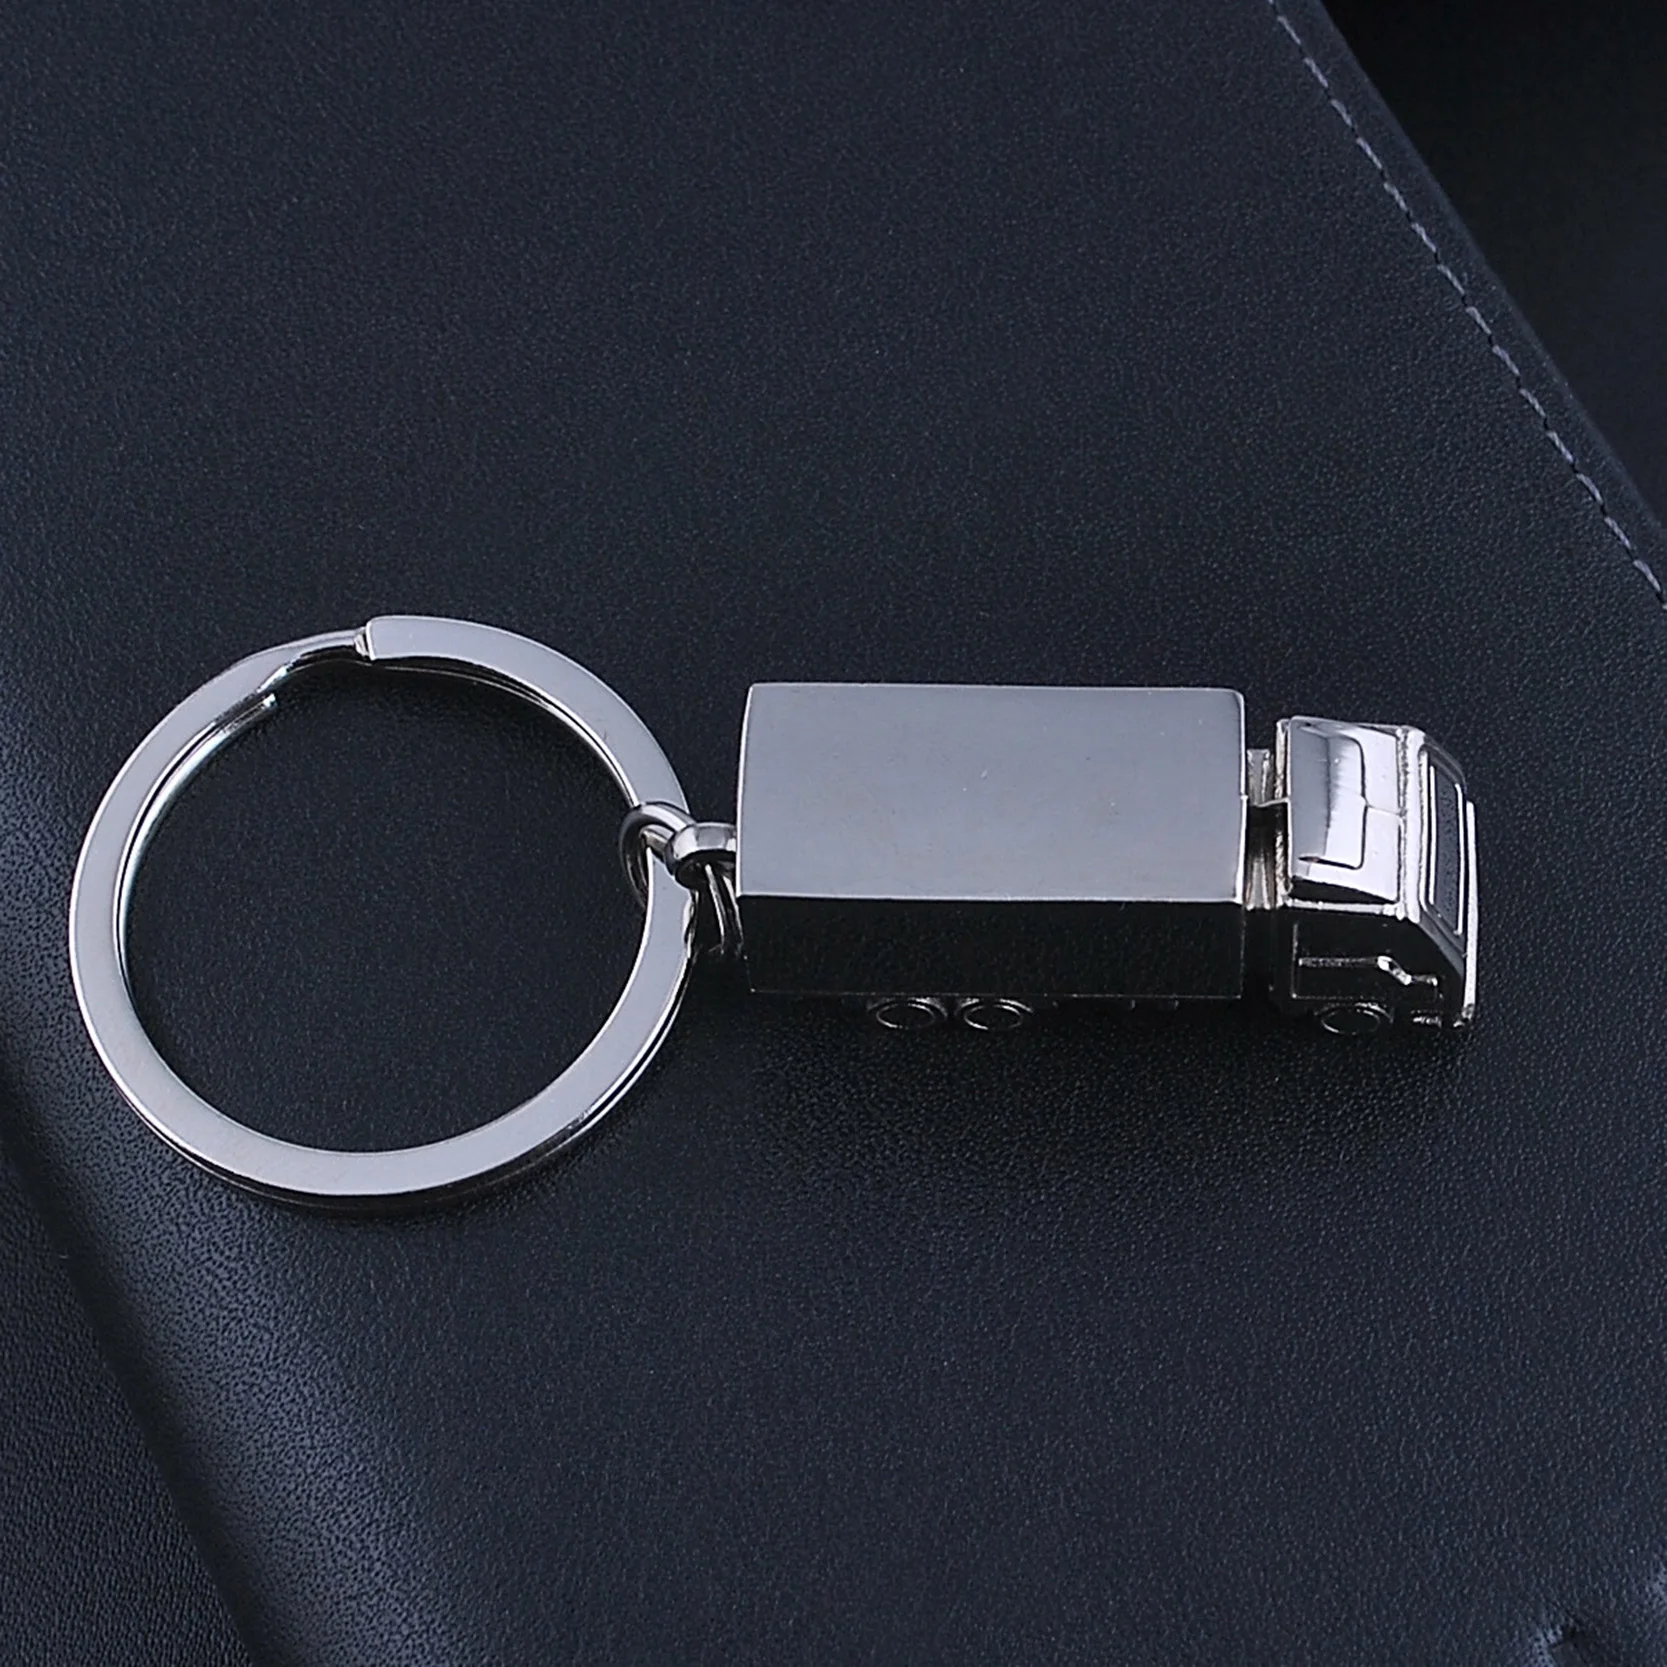 BMW M3 keyring silver plated holder and glass cabochon. 